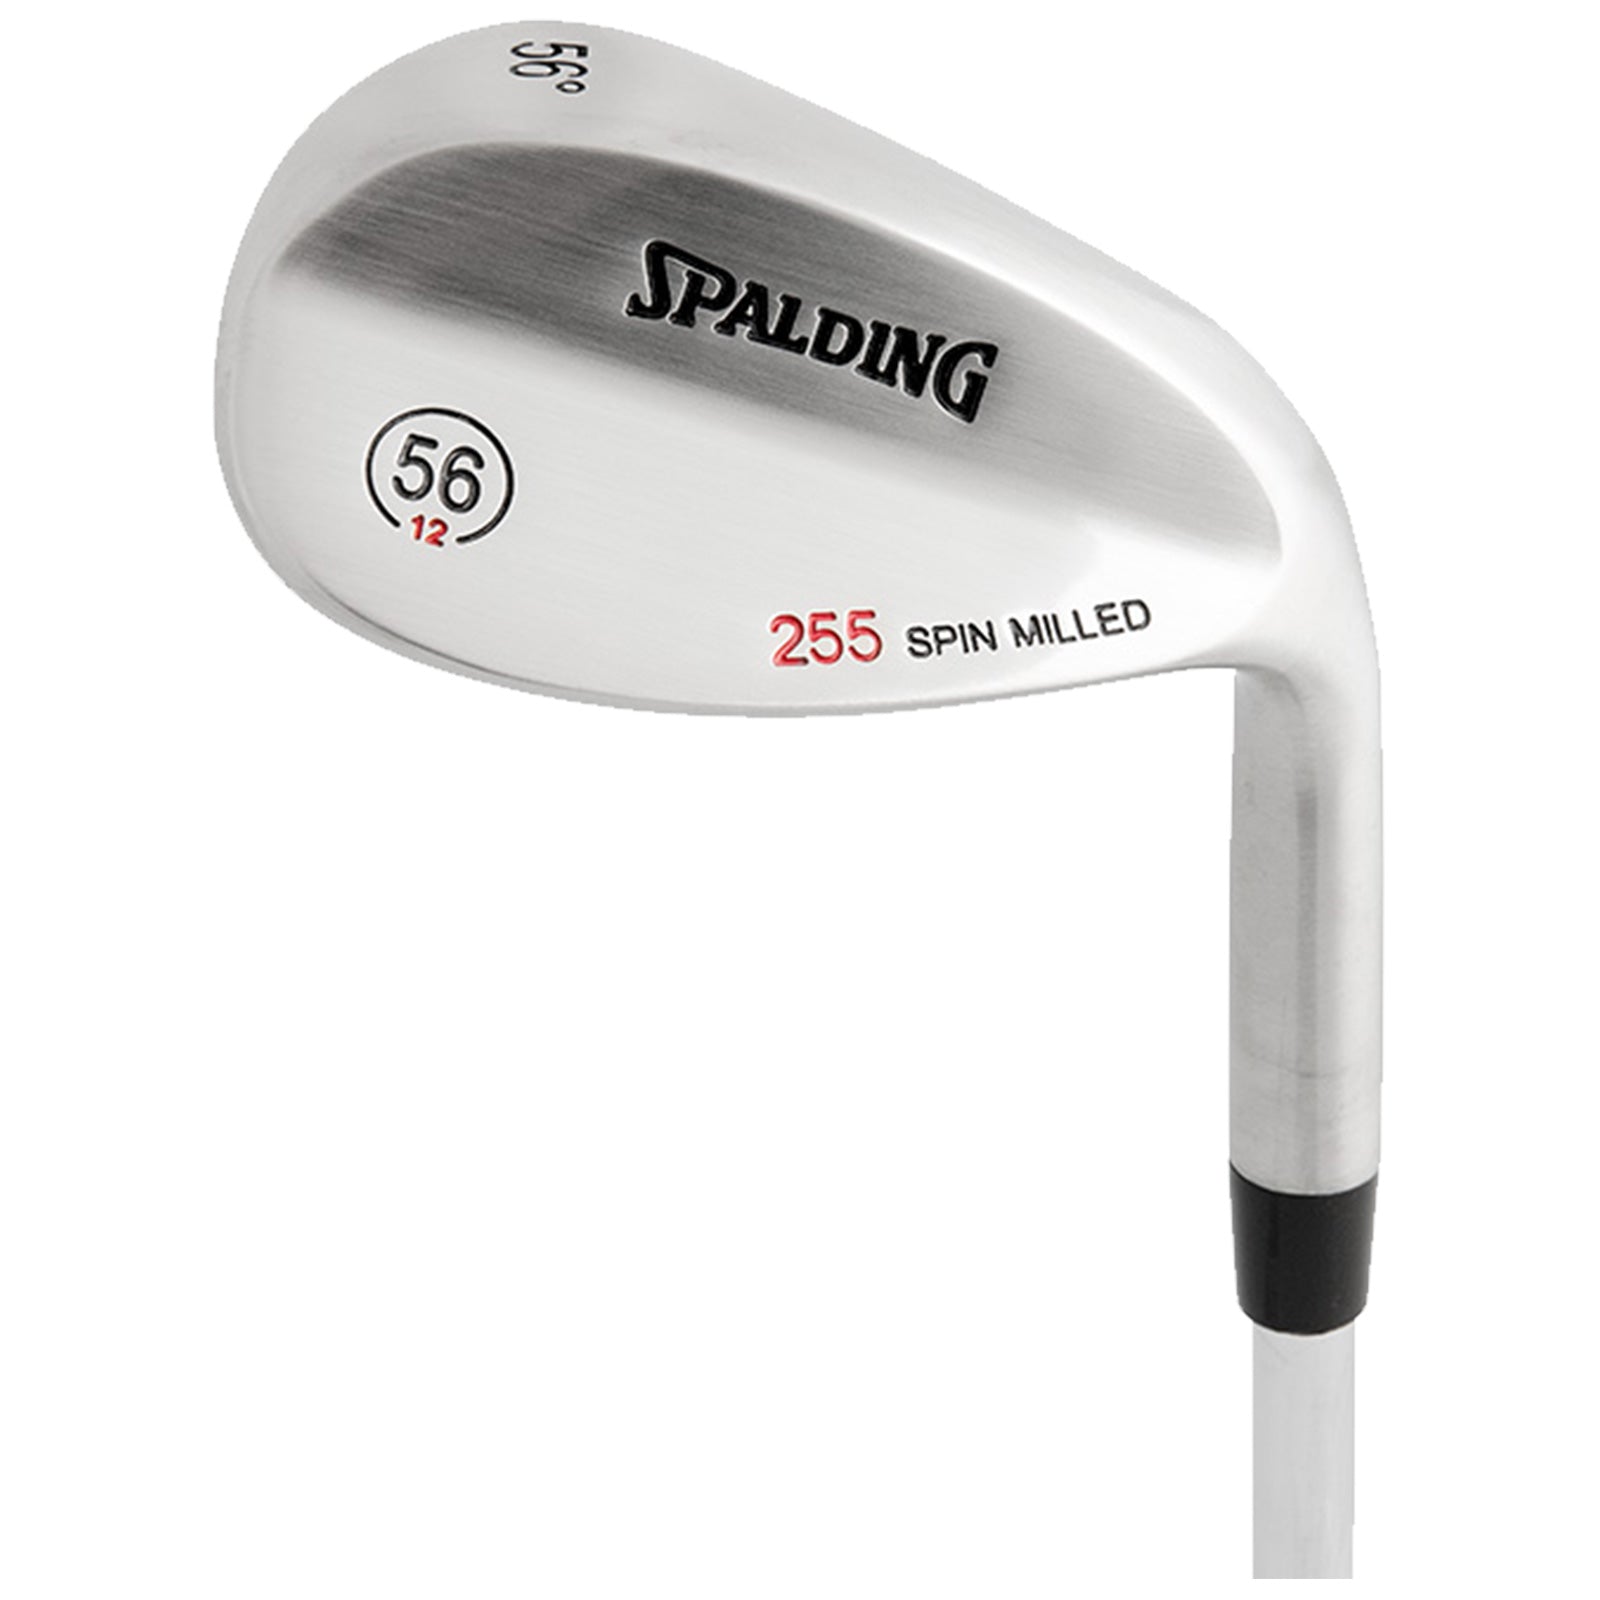 Spalding Mens 255 Spin Milled Wedge